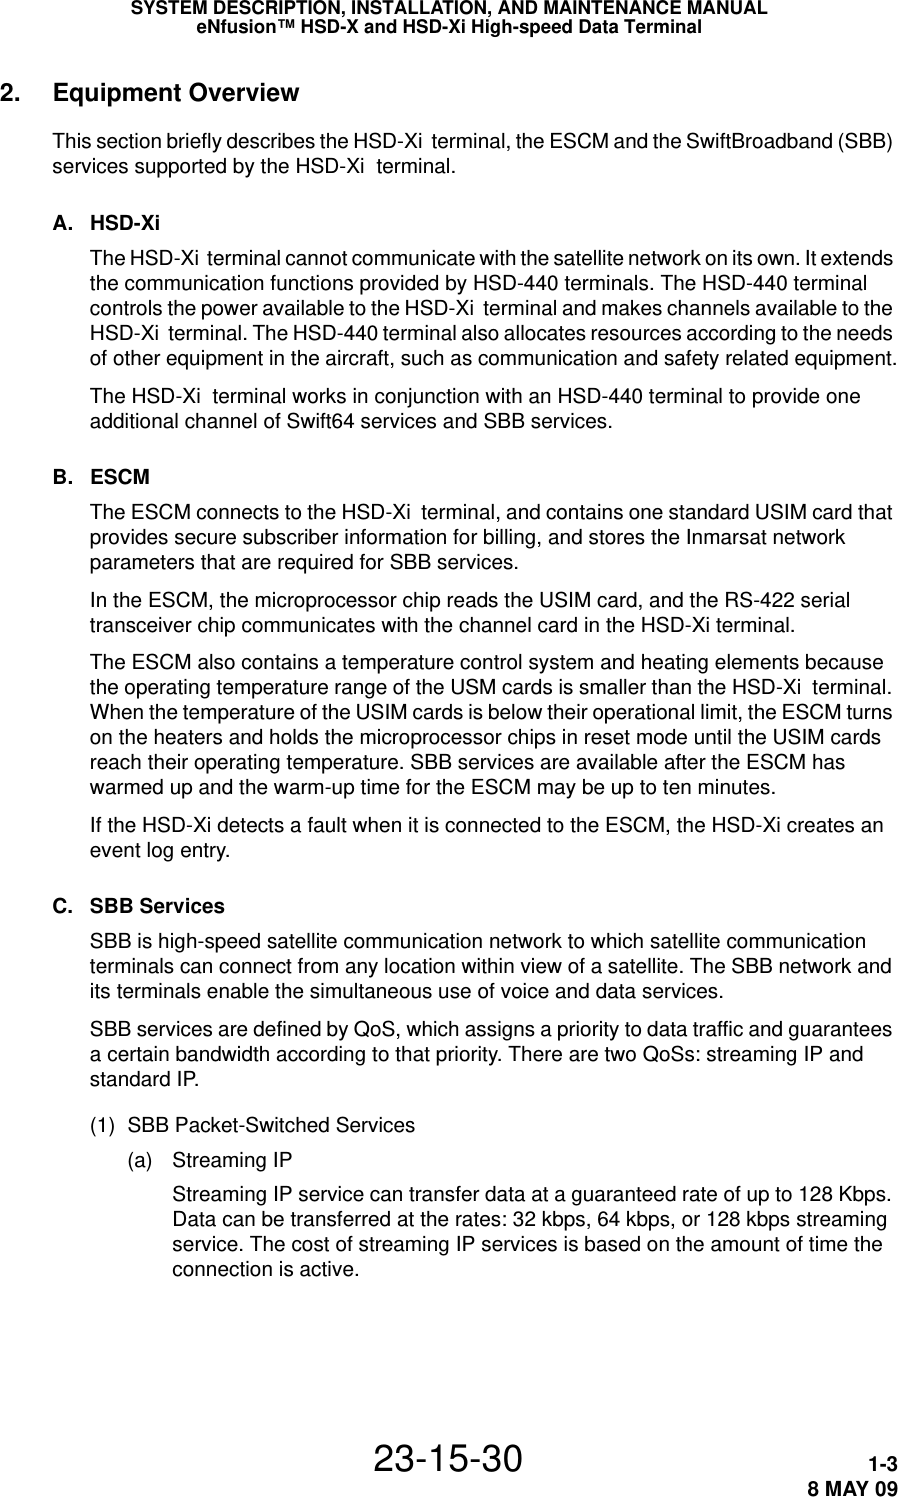 SYSTEM DESCRIPTION, INSTALLATION, AND MAINTENANCE MANUALeNfusion™ HSD-X and HSD-Xi High-speed Data Terminal23-15-30 1-38 MAY 092. Equipment OverviewThis section briefly describes the HSD-Xi  terminal, the ESCM and the SwiftBroadband (SBB) services supported by the HSD-Xi  terminal.A. HSD-Xi The HSD-Xi  terminal cannot communicate with the satellite network on its own. It extends the communication functions provided by HSD-440 terminals. The HSD-440 terminal controls the power available to the HSD-Xi  terminal and makes channels available to the HSD-Xi  terminal. The HSD-440 terminal also allocates resources according to the needs of other equipment in the aircraft, such as communication and safety related equipment.The HSD-Xi  terminal works in conjunction with an HSD-440 terminal to provide one additional channel of Swift64 services and SBB services.B. ESCMThe ESCM connects to the HSD-Xi  terminal, and contains one standard USIM card that provides secure subscriber information for billing, and stores the Inmarsat network parameters that are required for SBB services.In the ESCM, the microprocessor chip reads the USIM card, and the RS-422 serial transceiver chip communicates with the channel card in the HSD-Xi terminal.The ESCM also contains a temperature control system and heating elements because the operating temperature range of the USM cards is smaller than the HSD-Xi  terminal. When the temperature of the USIM cards is below their operational limit, the ESCM turns on the heaters and holds the microprocessor chips in reset mode until the USIM cards reach their operating temperature. SBB services are available after the ESCM has warmed up and the warm-up time for the ESCM may be up to ten minutes.If the HSD-Xi detects a fault when it is connected to the ESCM, the HSD-Xi creates an event log entry.C. SBB ServicesSBB is high-speed satellite communication network to which satellite communication terminals can connect from any location within view of a satellite. The SBB network and its terminals enable the simultaneous use of voice and data services.SBB services are defined by QoS, which assigns a priority to data traffic and guarantees a certain bandwidth according to that priority. There are two QoSs: streaming IP and standard IP.(1) SBB Packet-Switched Services(a) Streaming IPStreaming IP service can transfer data at a guaranteed rate of up to 128 Kbps. Data can be transferred at the rates: 32 kbps, 64 kbps, or 128 kbps streaming service. The cost of streaming IP services is based on the amount of time the connection is active.